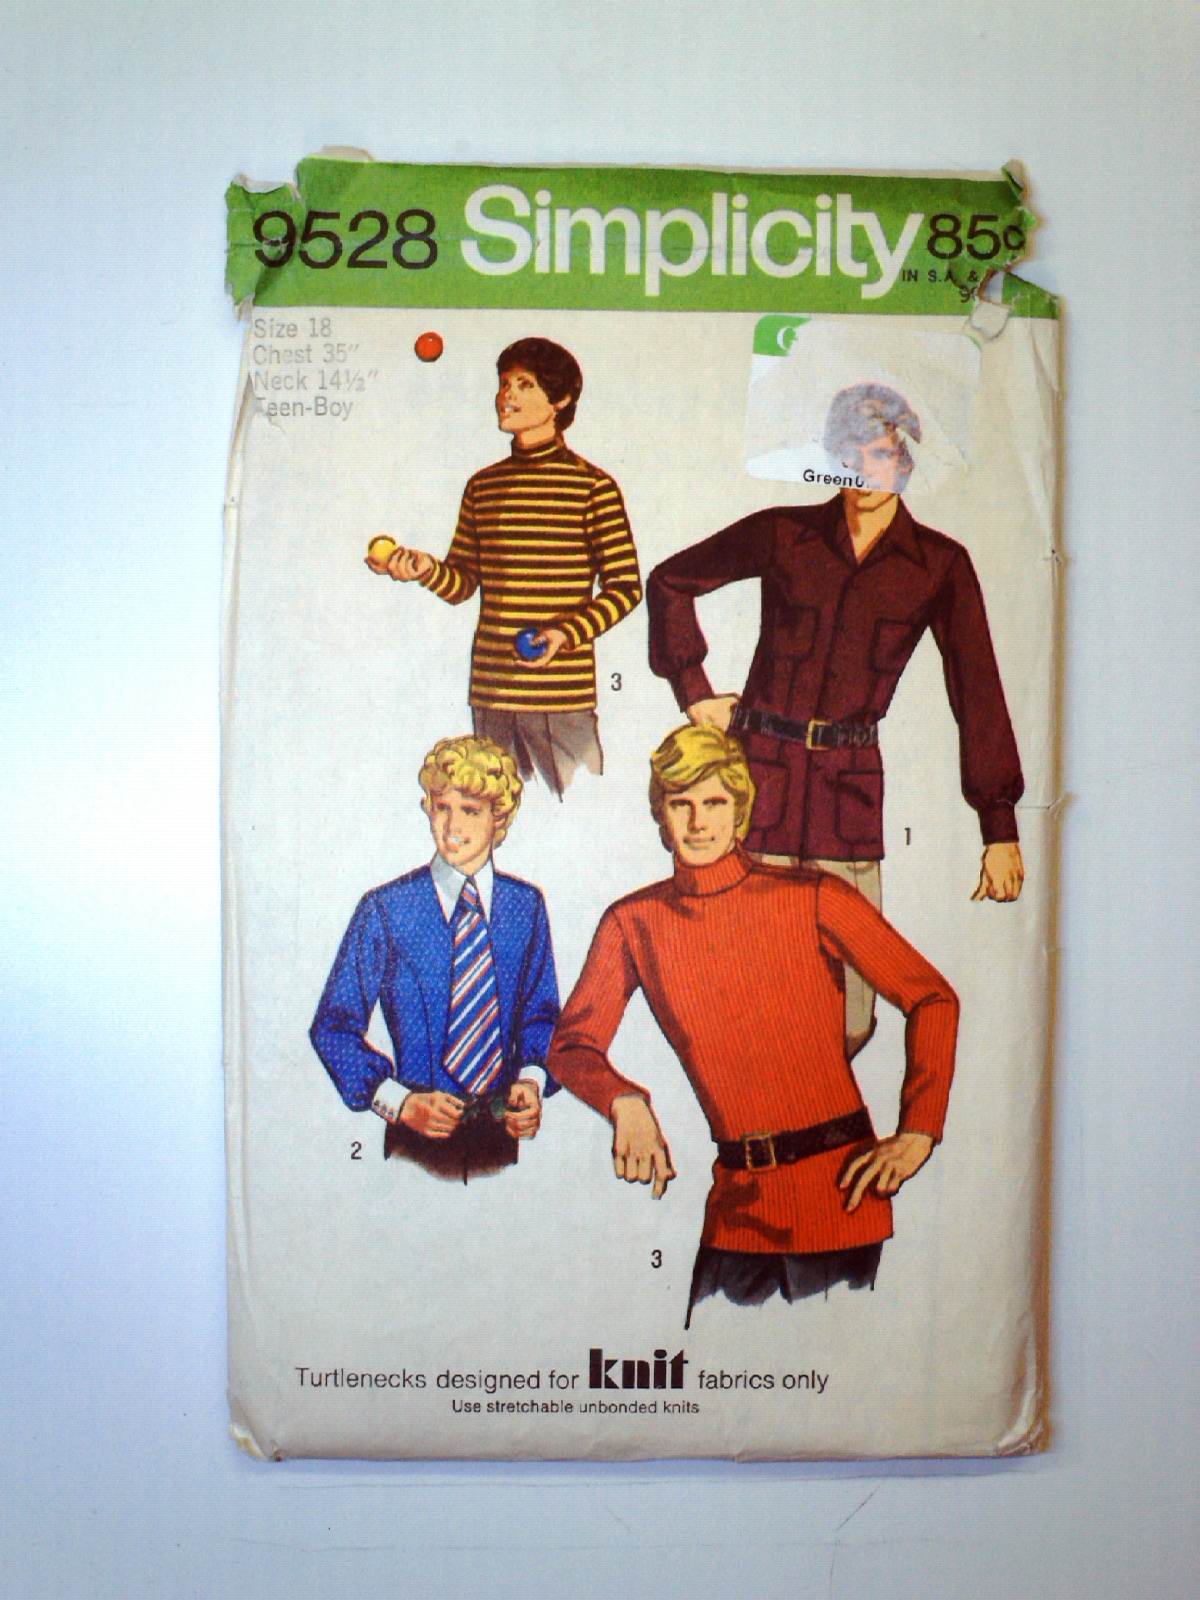 70's Simplicity 9528 Sewing Pattern: 71 -Simplicity 9528- Teen boys ...